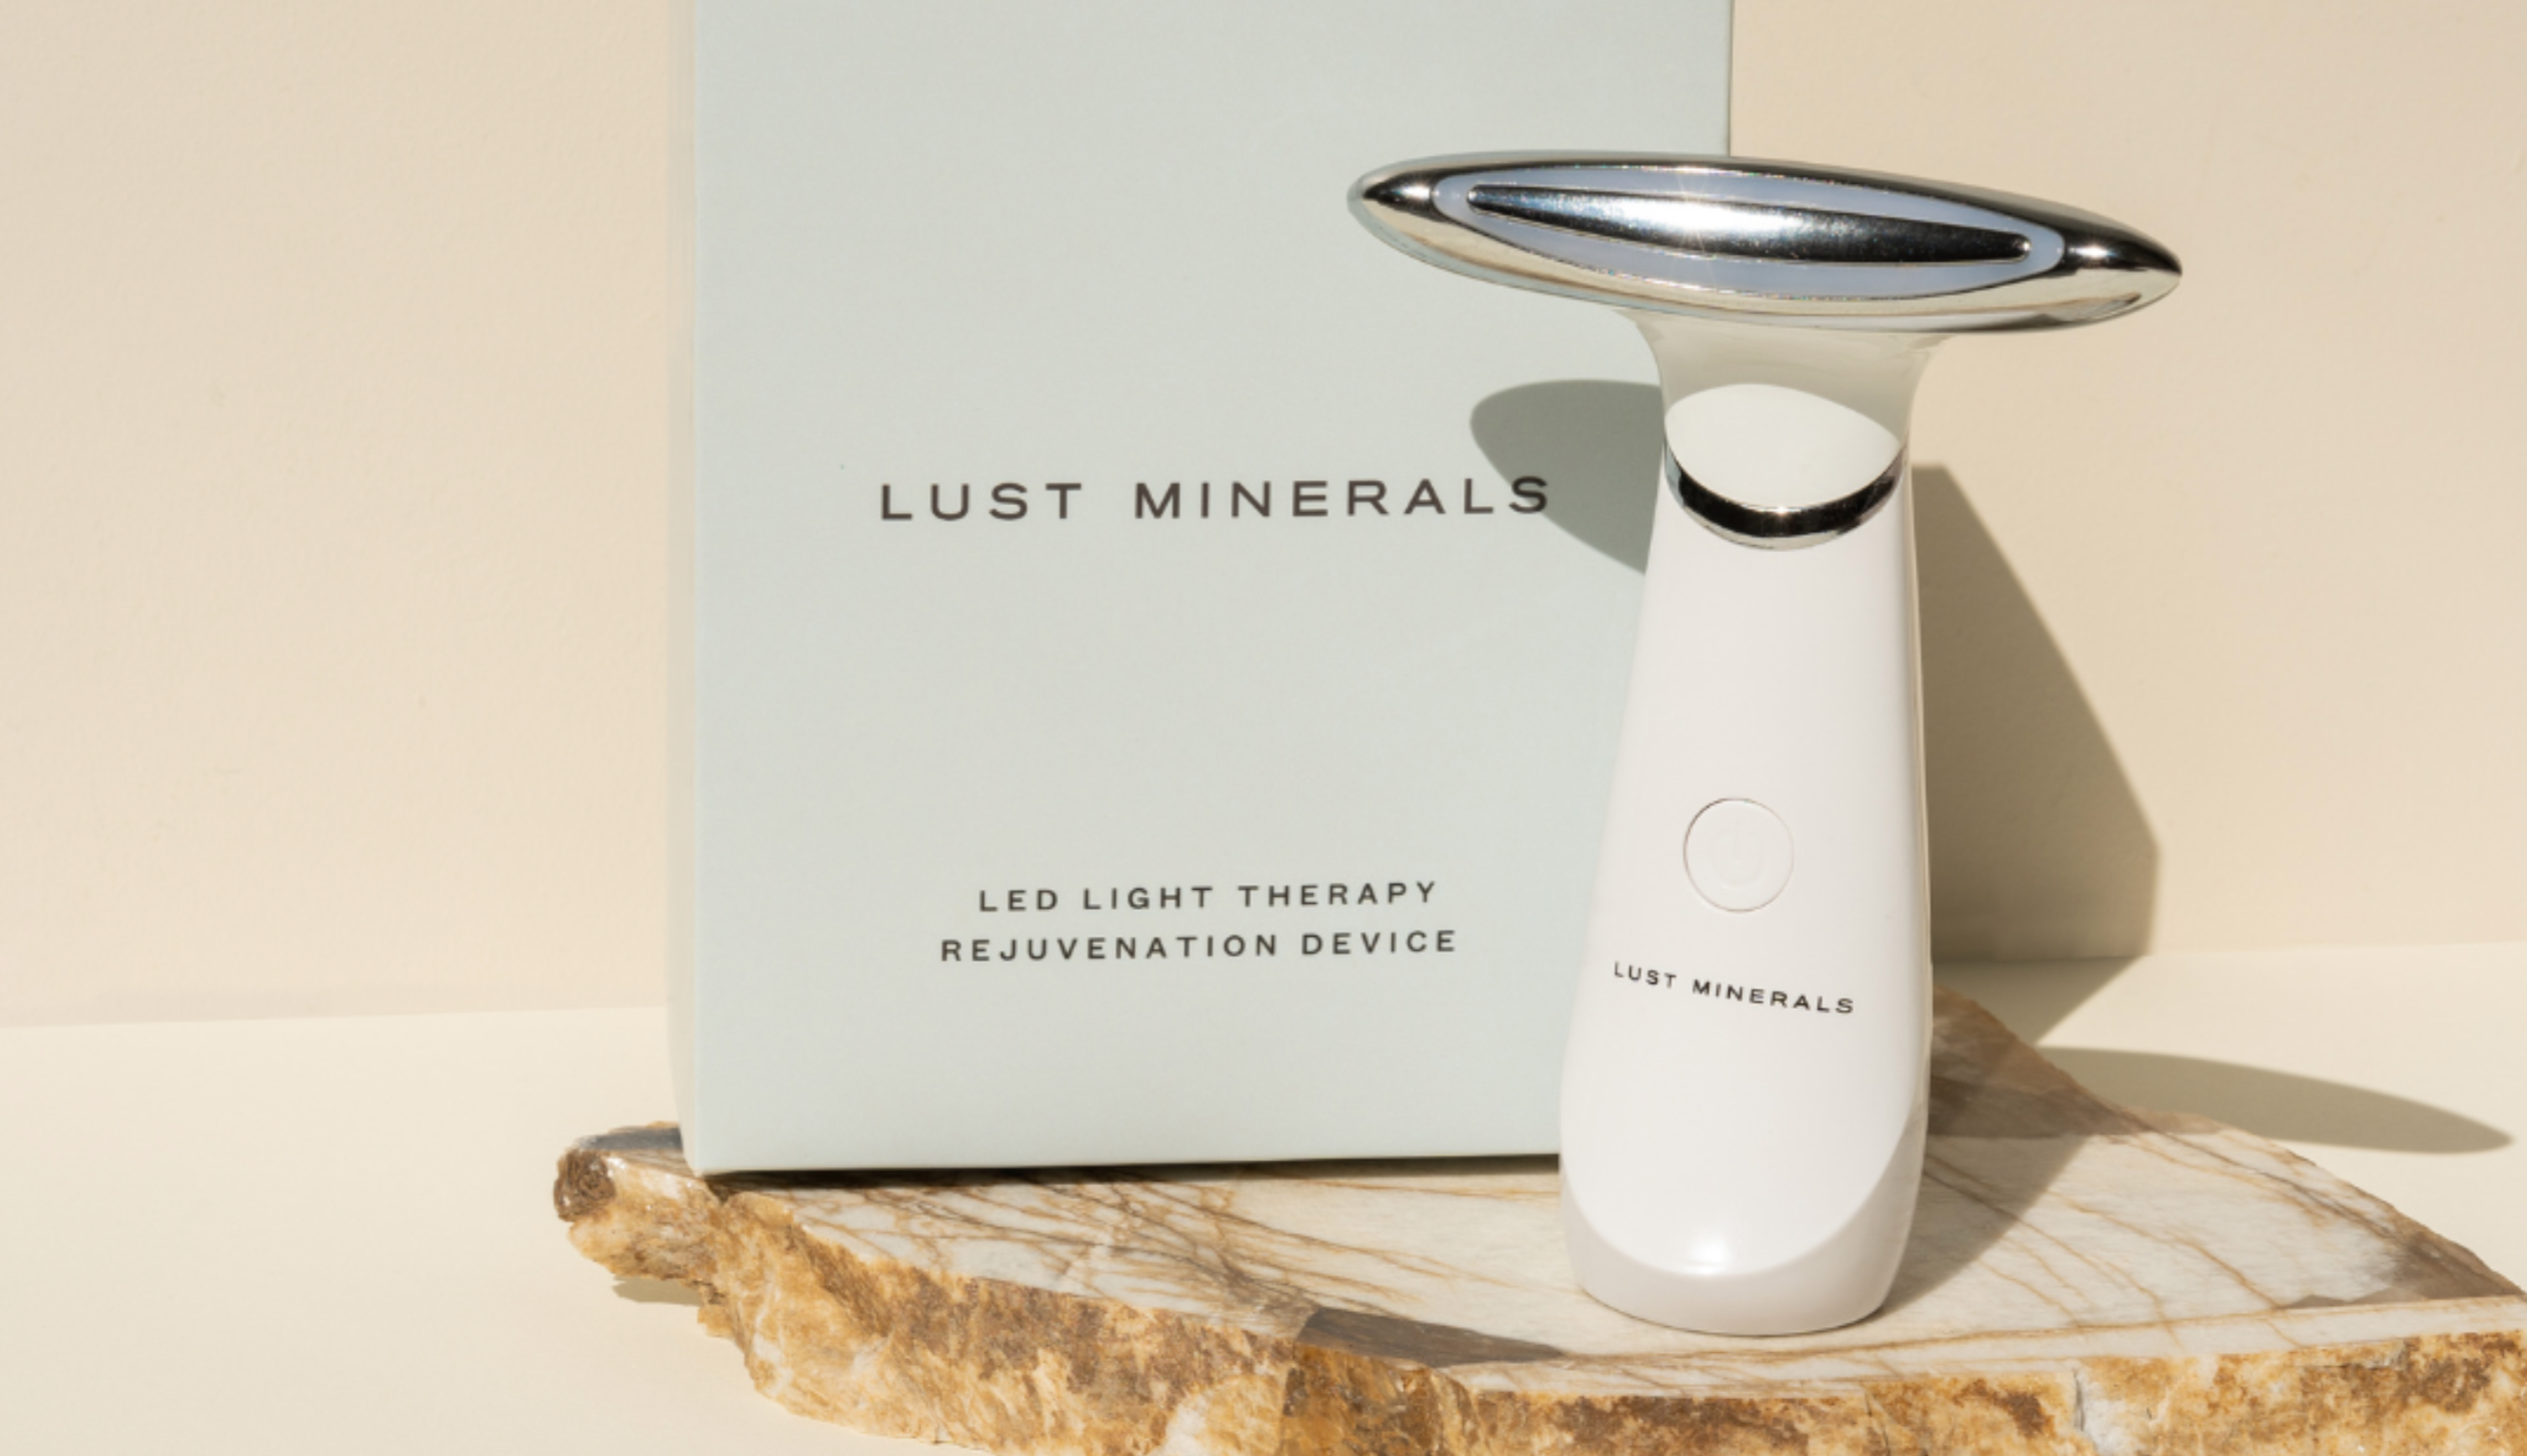 Here’s how you can score this mini LED device to sculpt, tighten & brighten your skin FREE